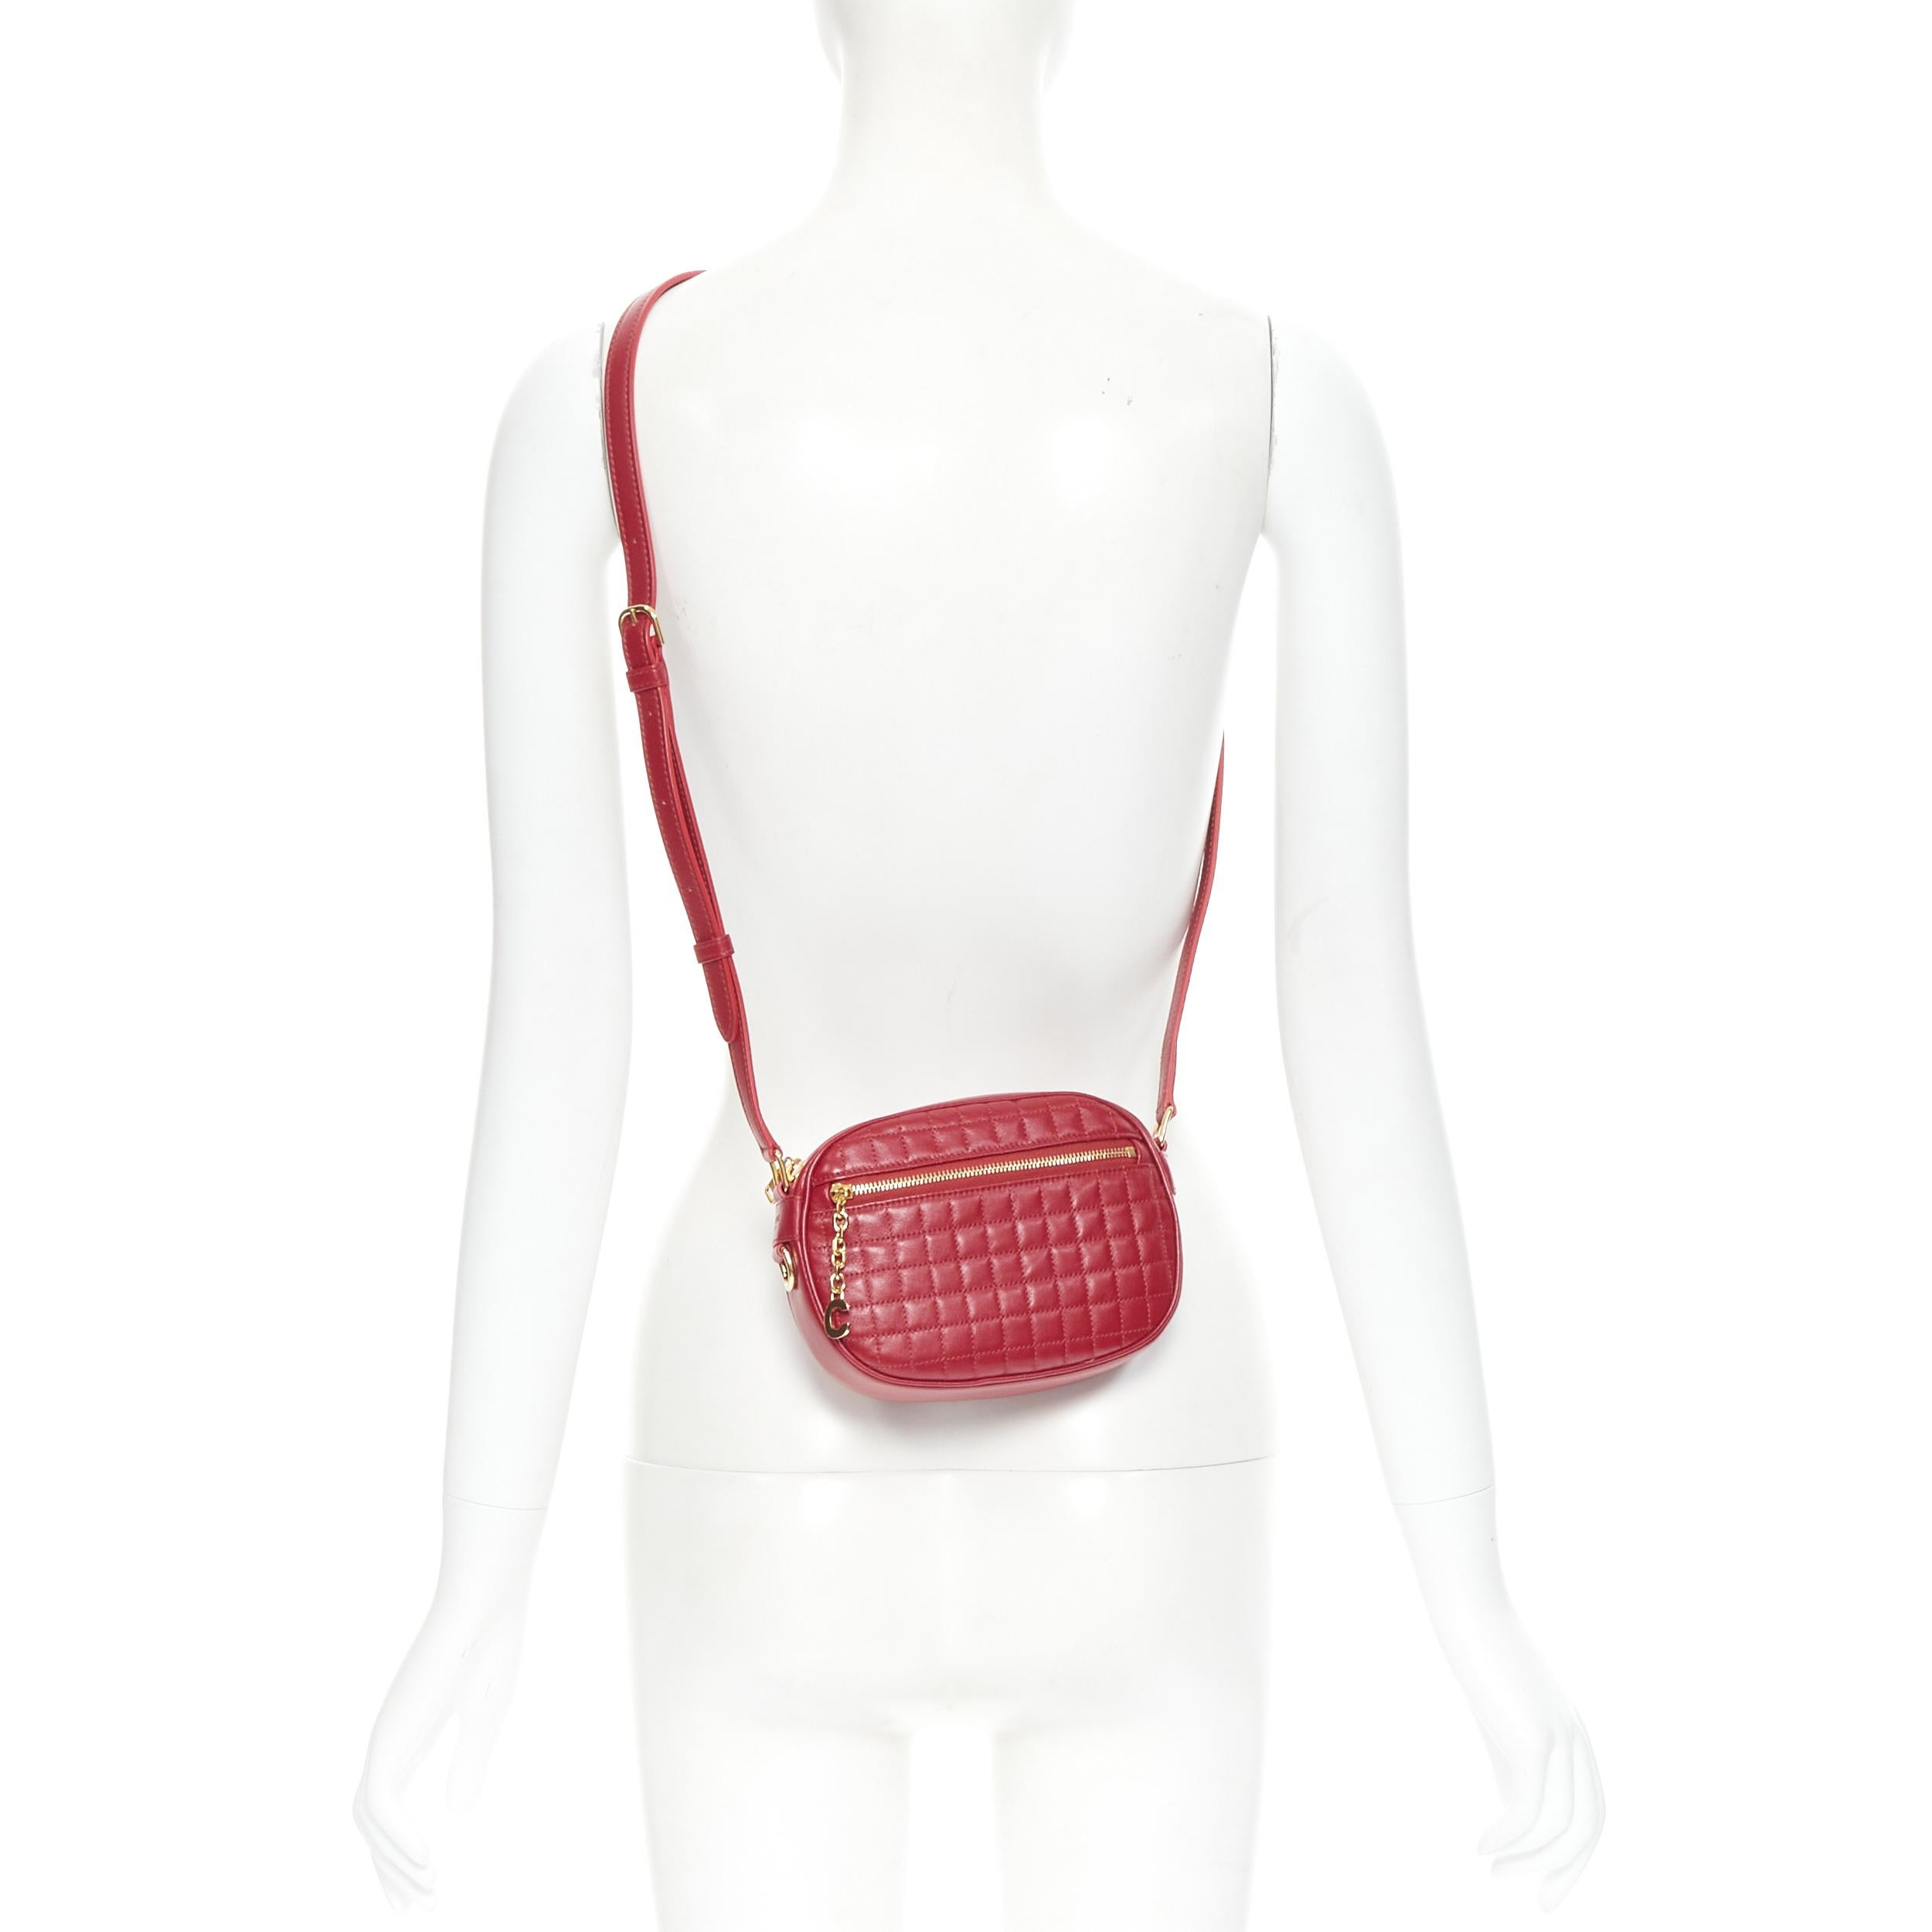 new CELINE Hedi Slimane 2019 C Charm red quilted small crossbody camera bag
Reference: TGAS/B01430
Brand: Celine
Designer: Hedi Slimane
Model: Small C Charm camera bag
Collection: 2019
Material: Leather
Color: Red
Closure: Zip
Extra Details: C